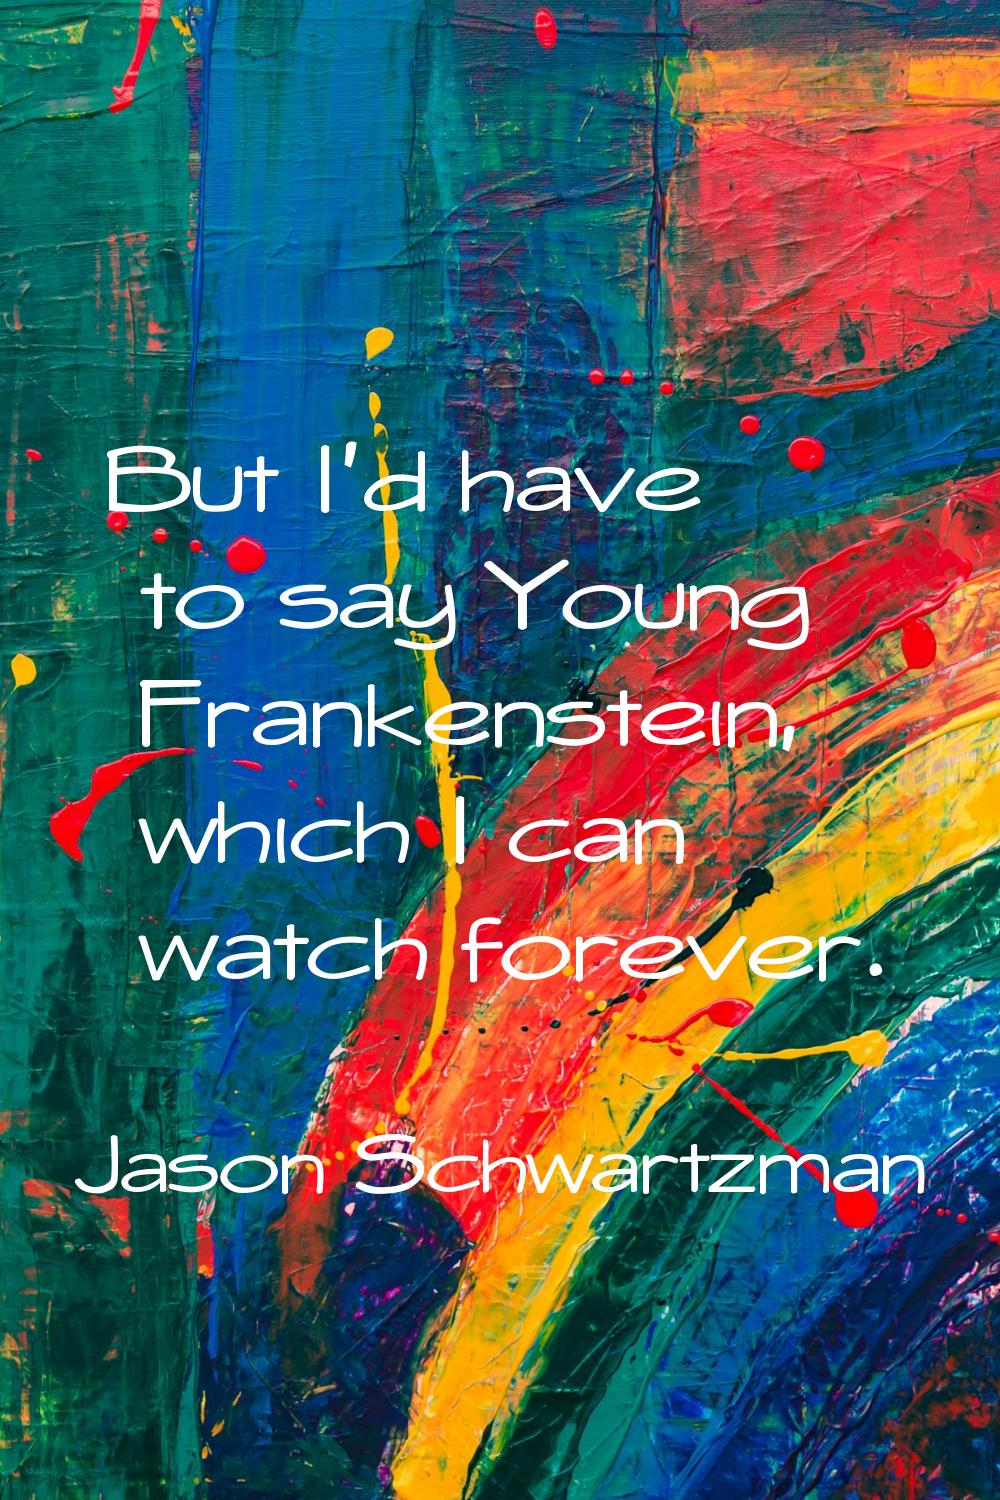 But I'd have to say Young Frankenstein, which I can watch forever.